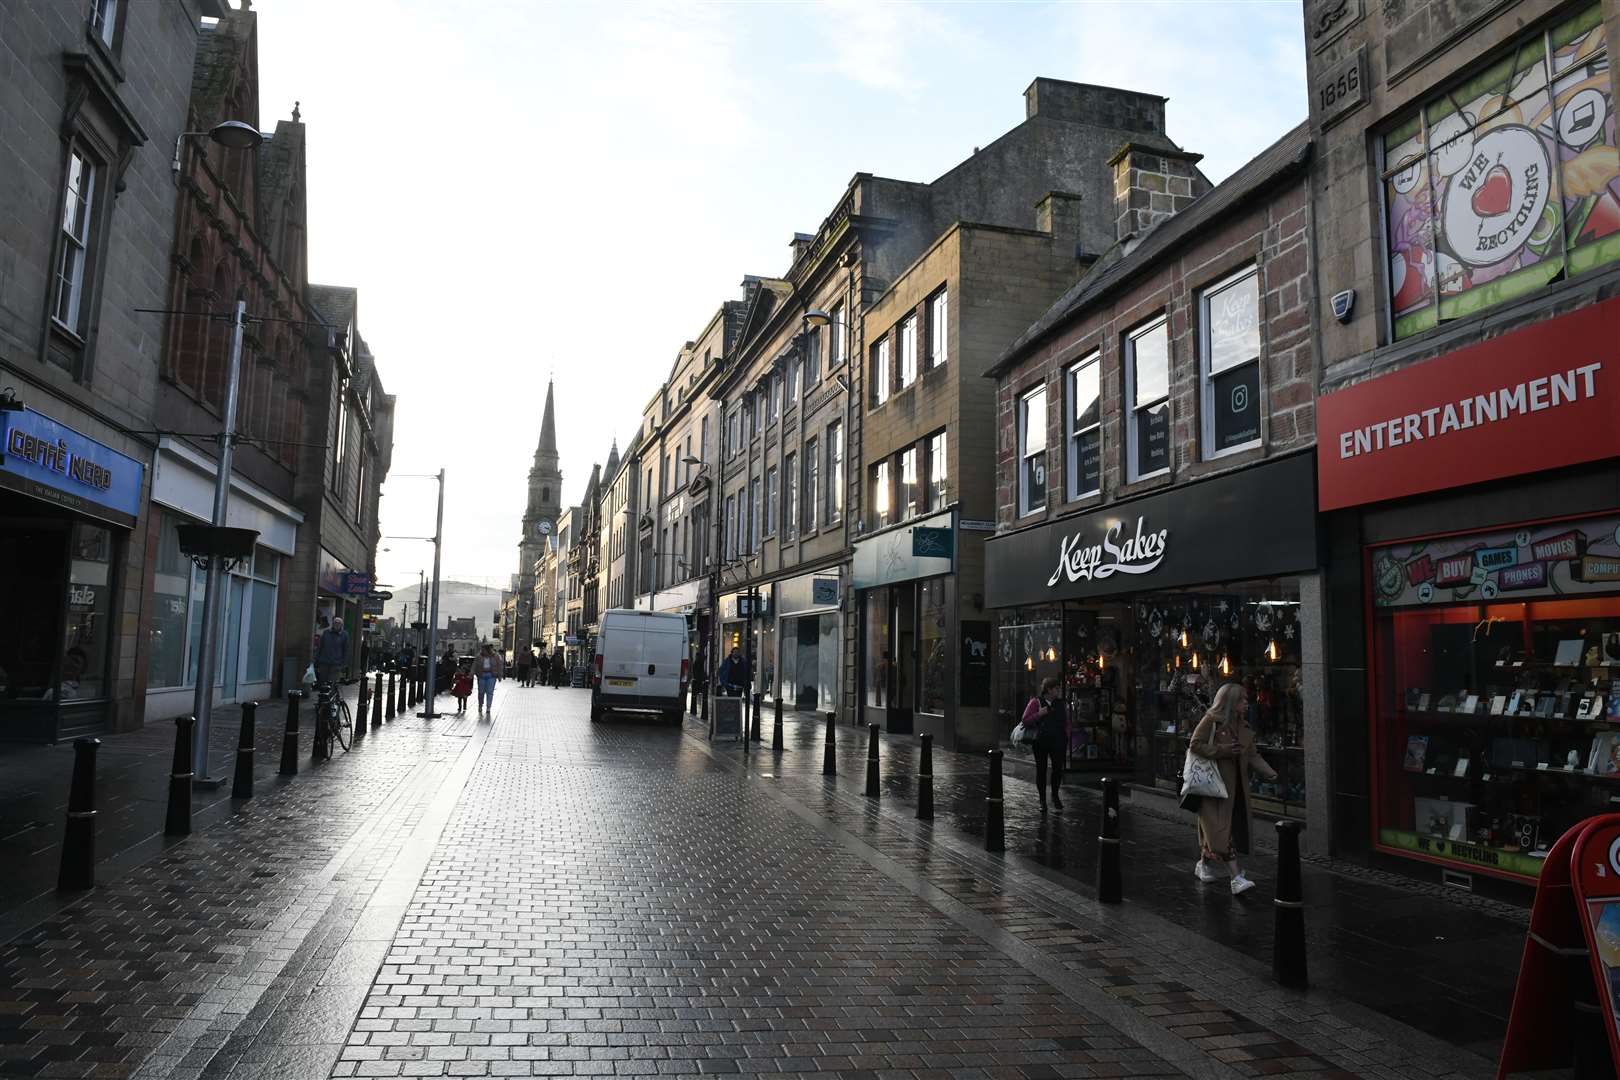 Our readers suggest some new business additions for Inverness High Street